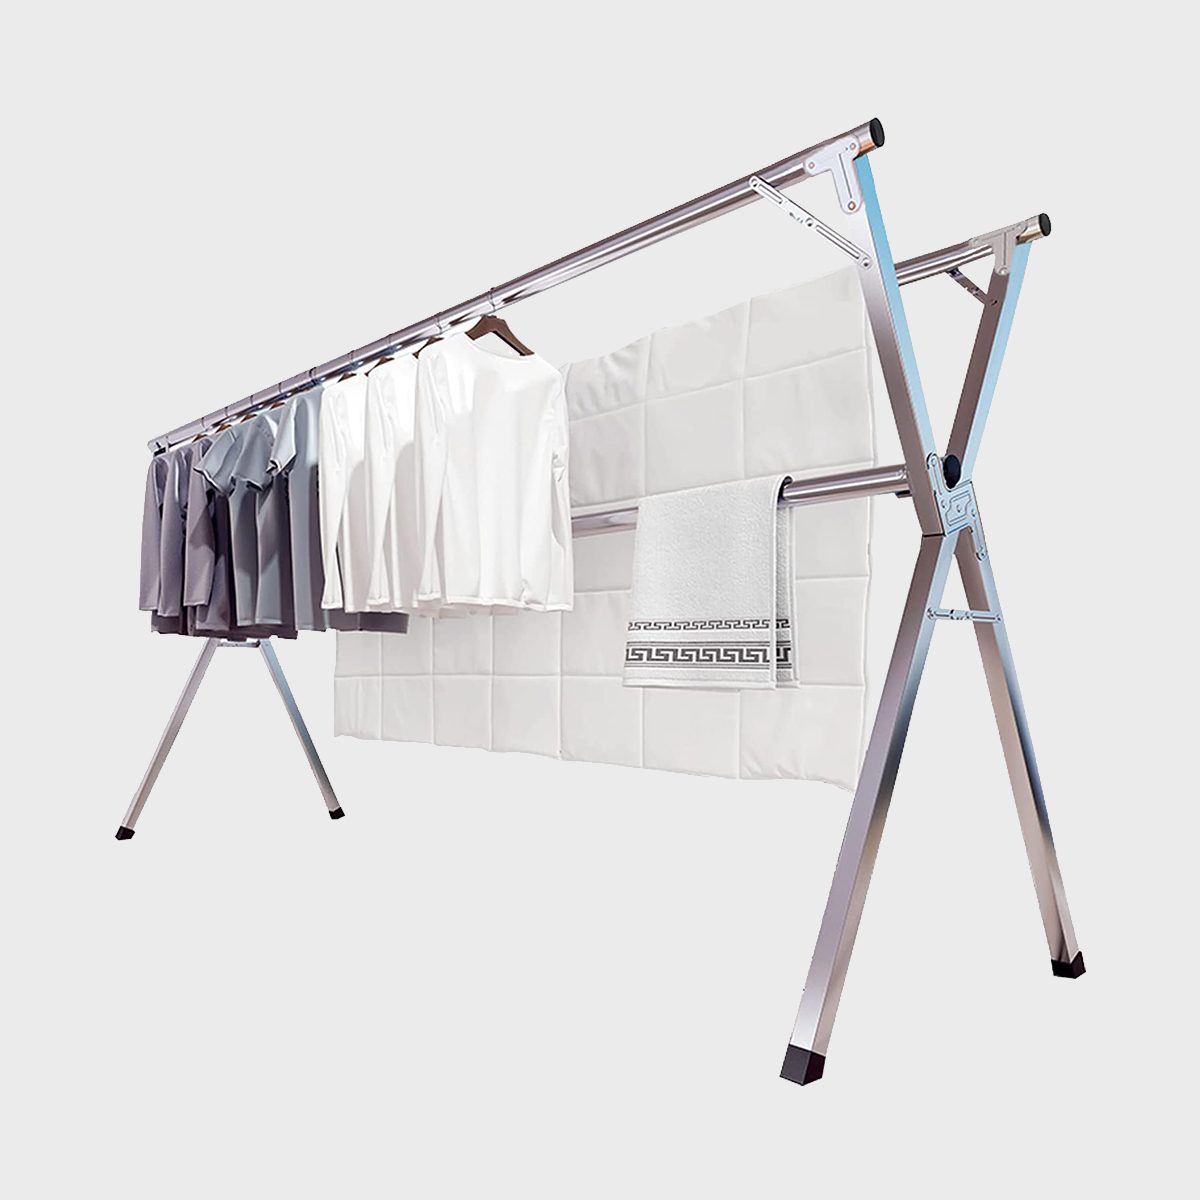 Best clothes drying rack I've ever owned